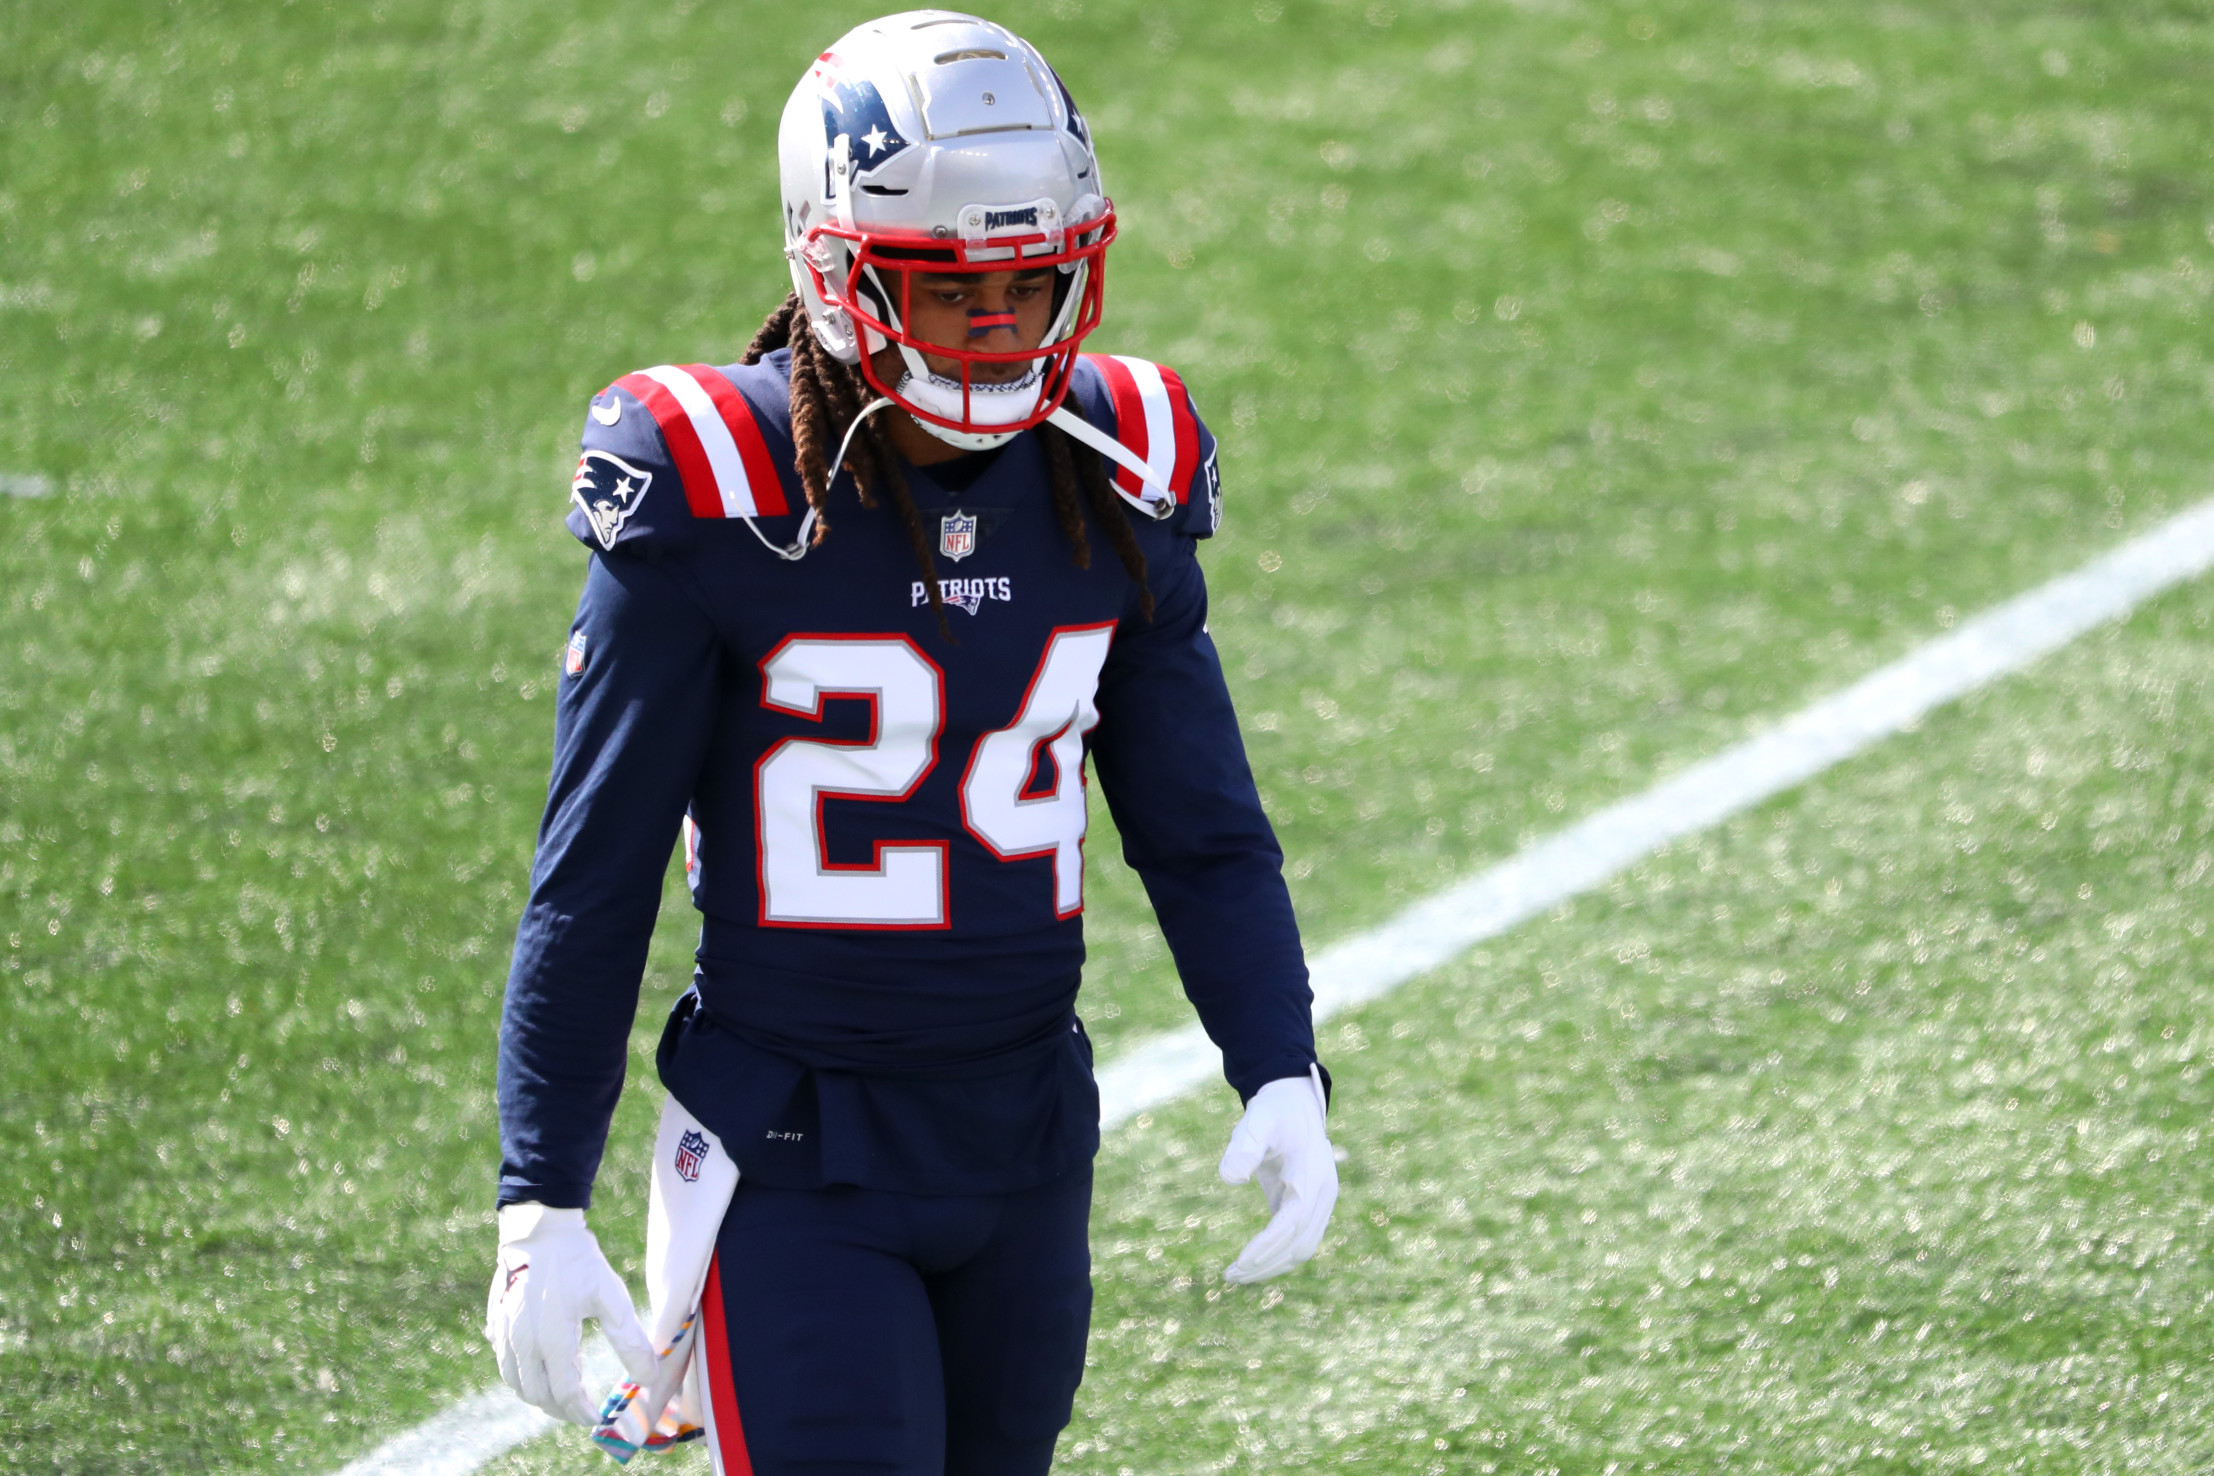 2 Crazy Stats To Note For New Cowboys' CB Stephon Gilmore